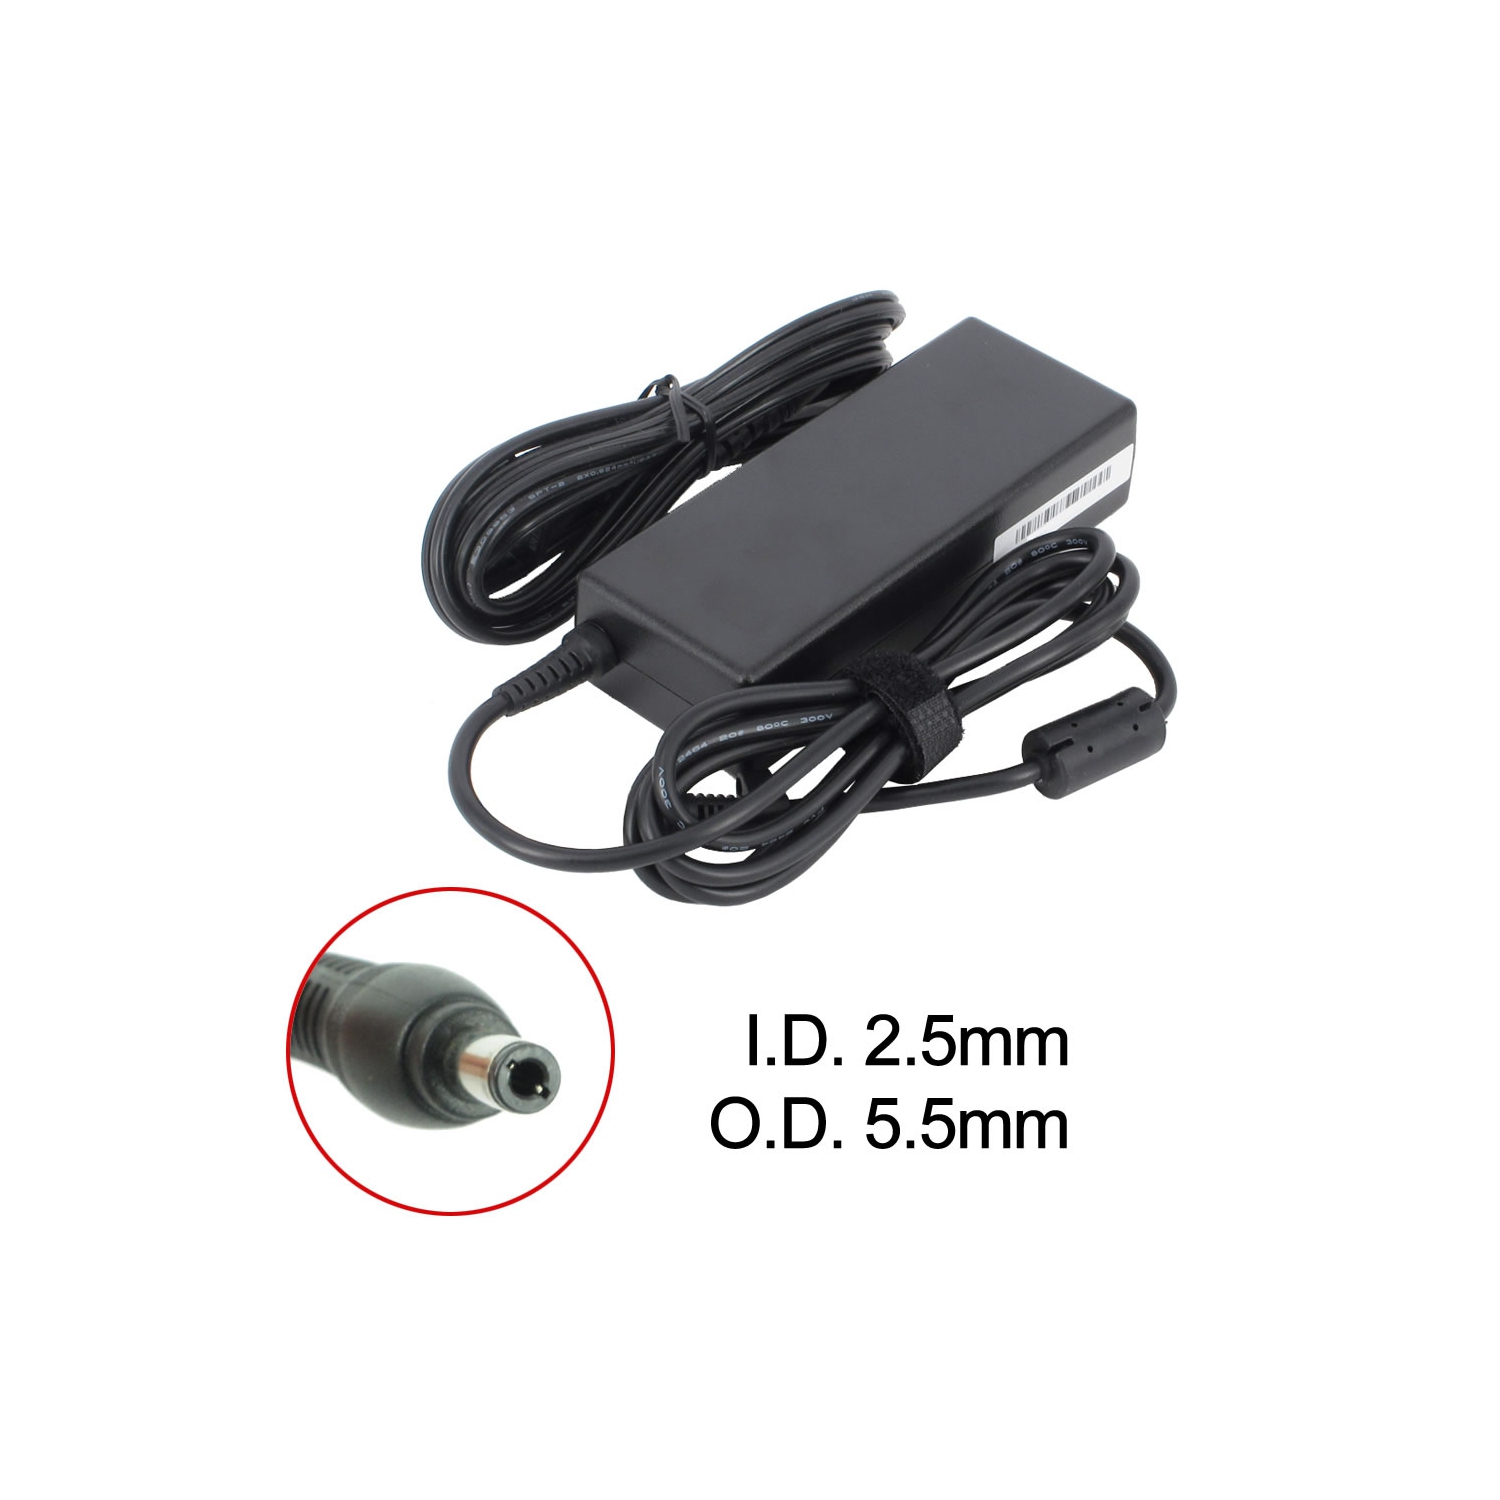 New Laptop AC Adapter for LG A1-PPRAG, 103942, 808-875692-010A, 9T458, ADP-65 HB BBEF, PA-1900-36, SA80-3115